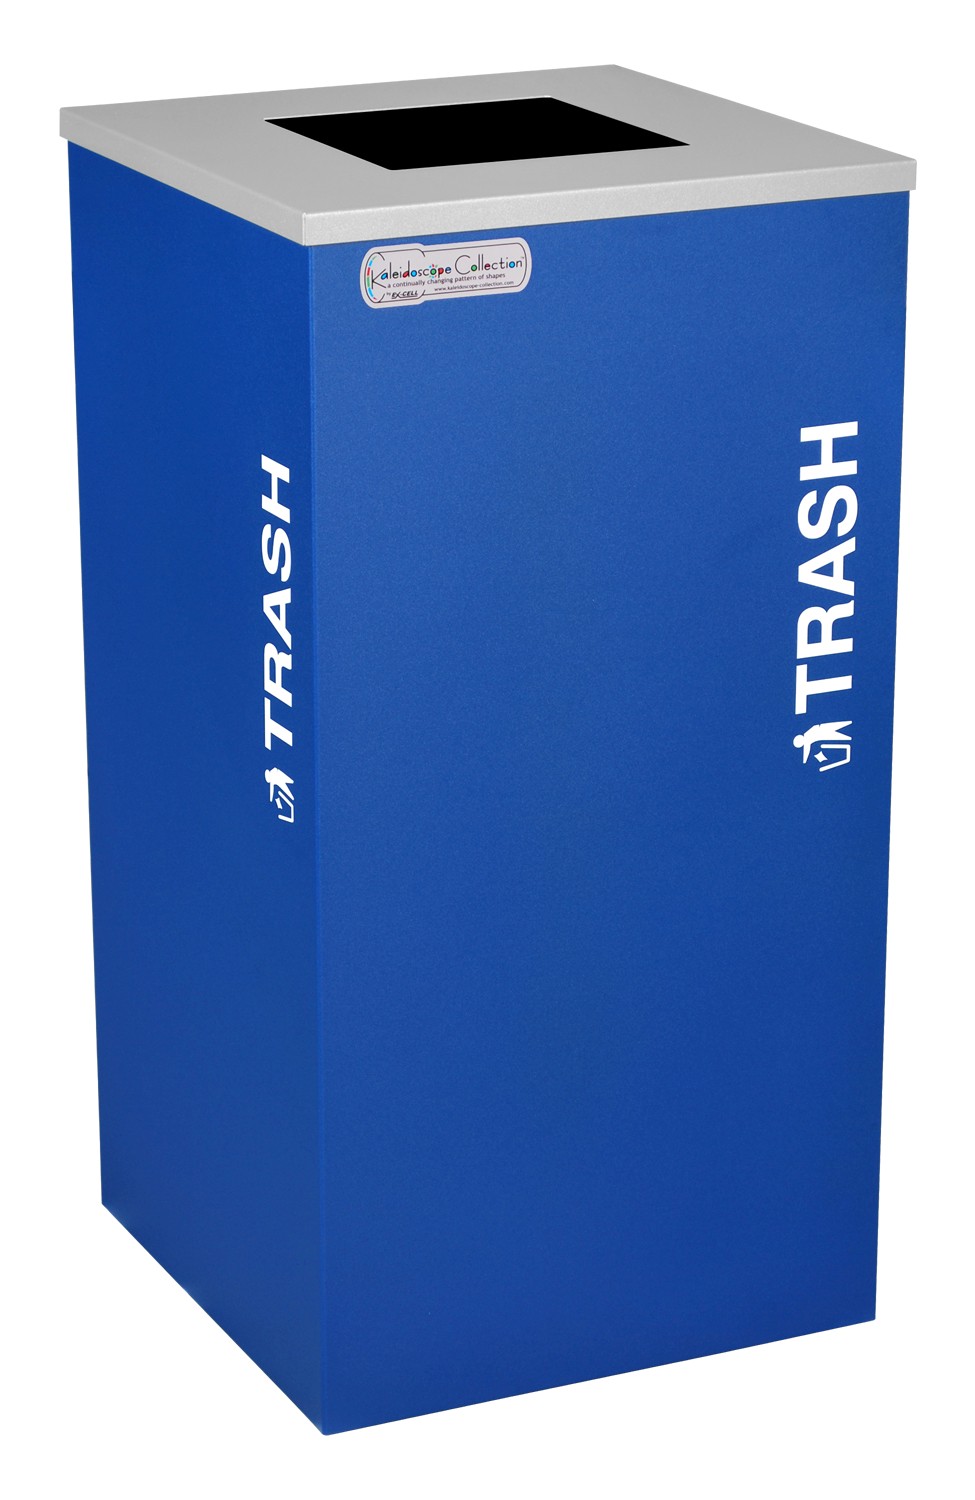 Ex-Cell Kaiser LLC Ex-Cell Kaiser RC-KDSQ-T RYX 18-gal recycling recptacle- square top and Trash decal- Royal Blue Texture finish